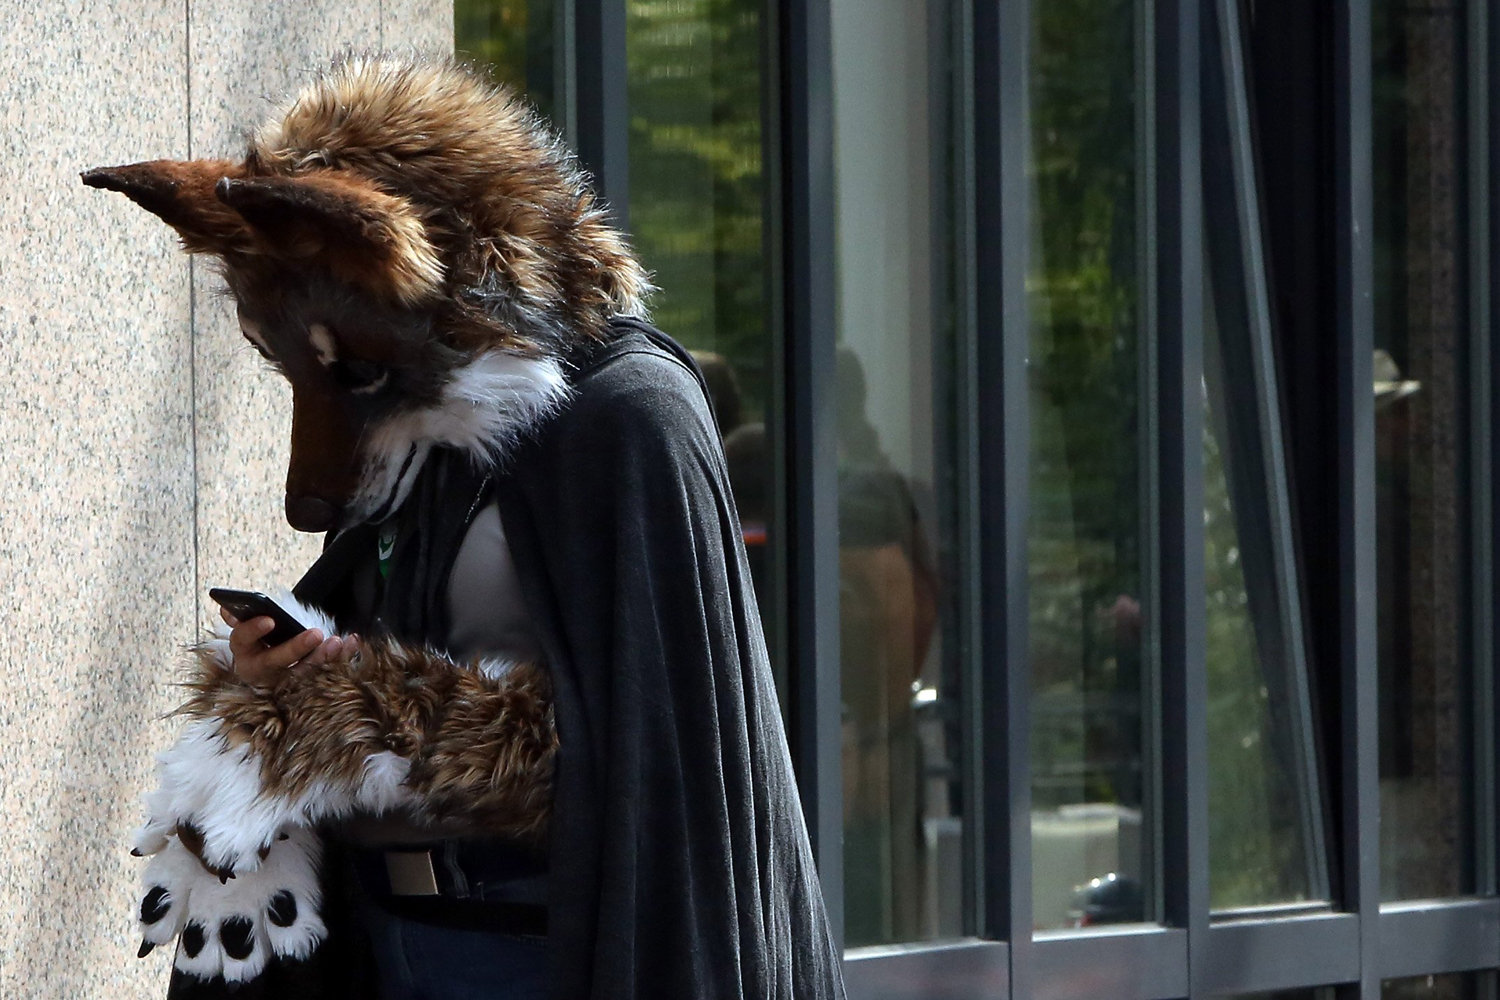 A Furry enthusiast uses a mobile phone as he attends the Eurofurence 2014 conference in Berlin on Aug. 22, 2014.